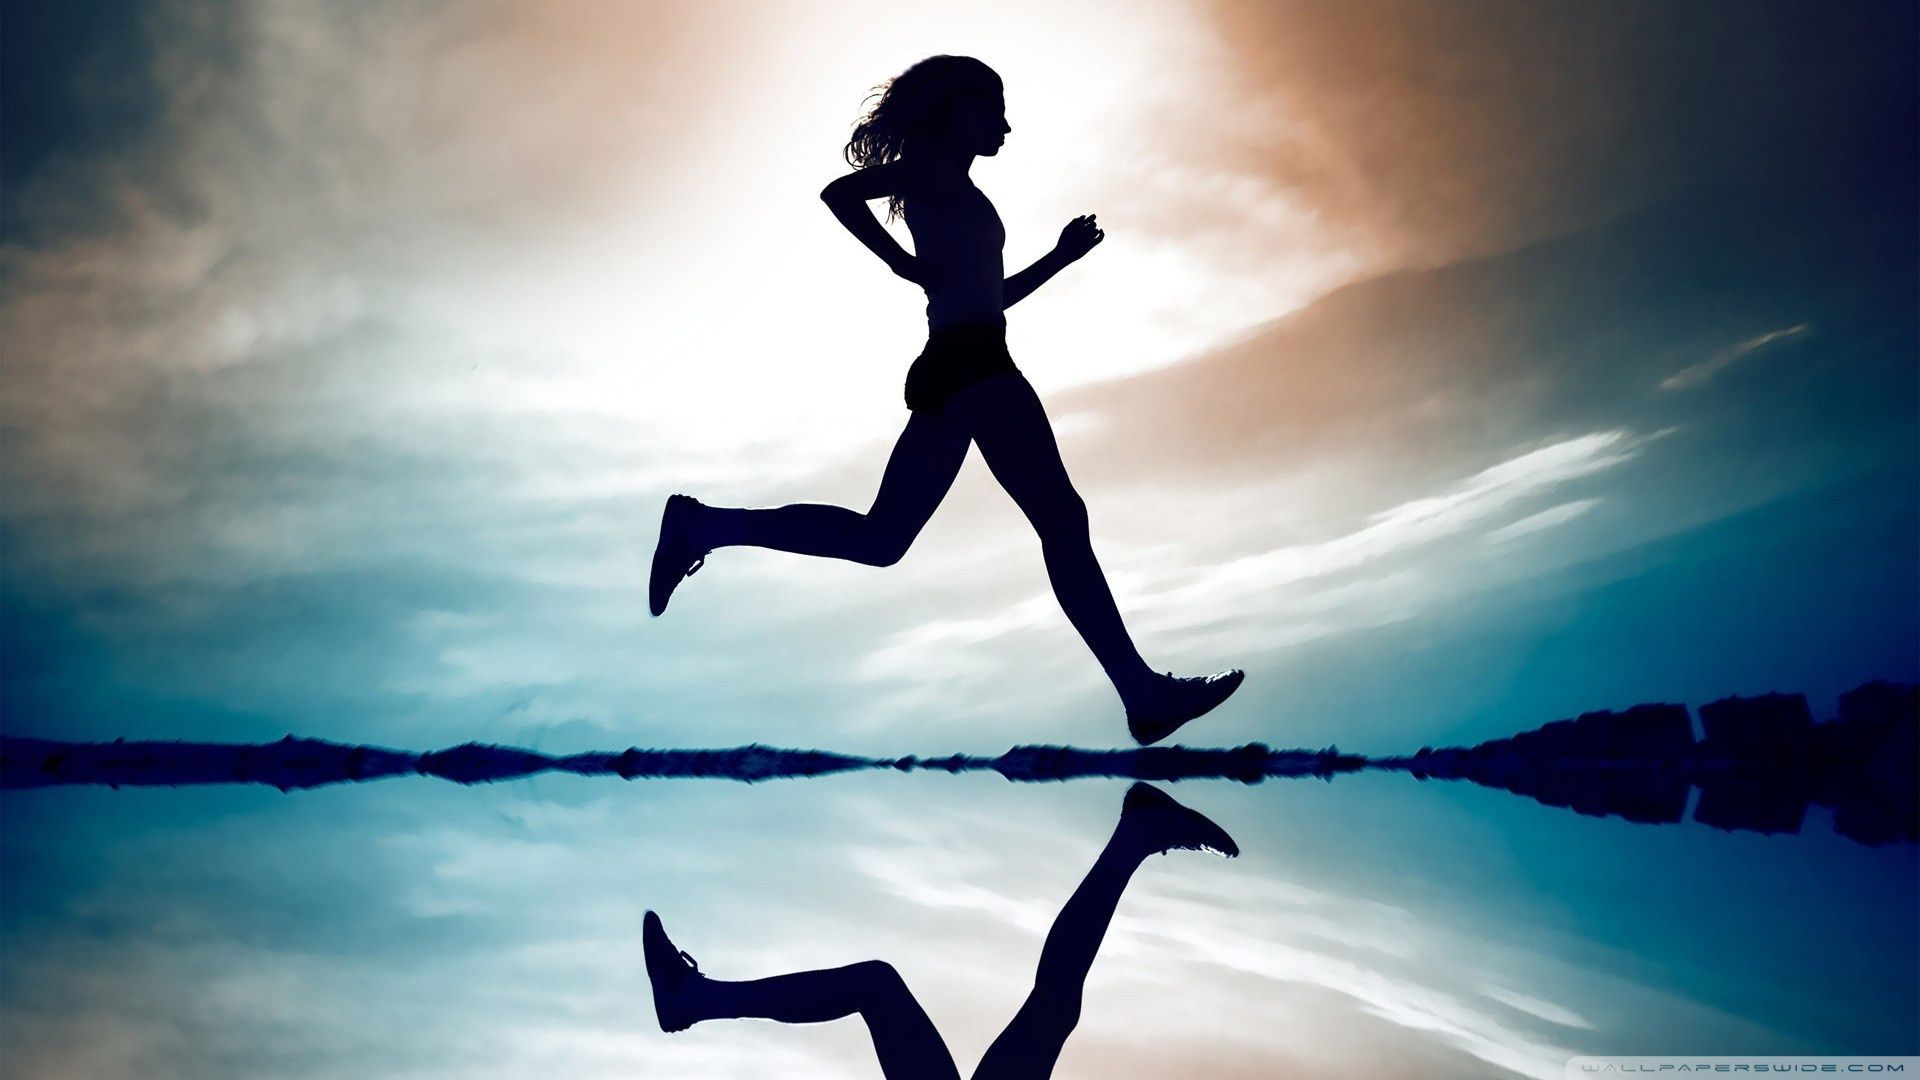 20 Running wallpapers HD  Download Free backgrounds